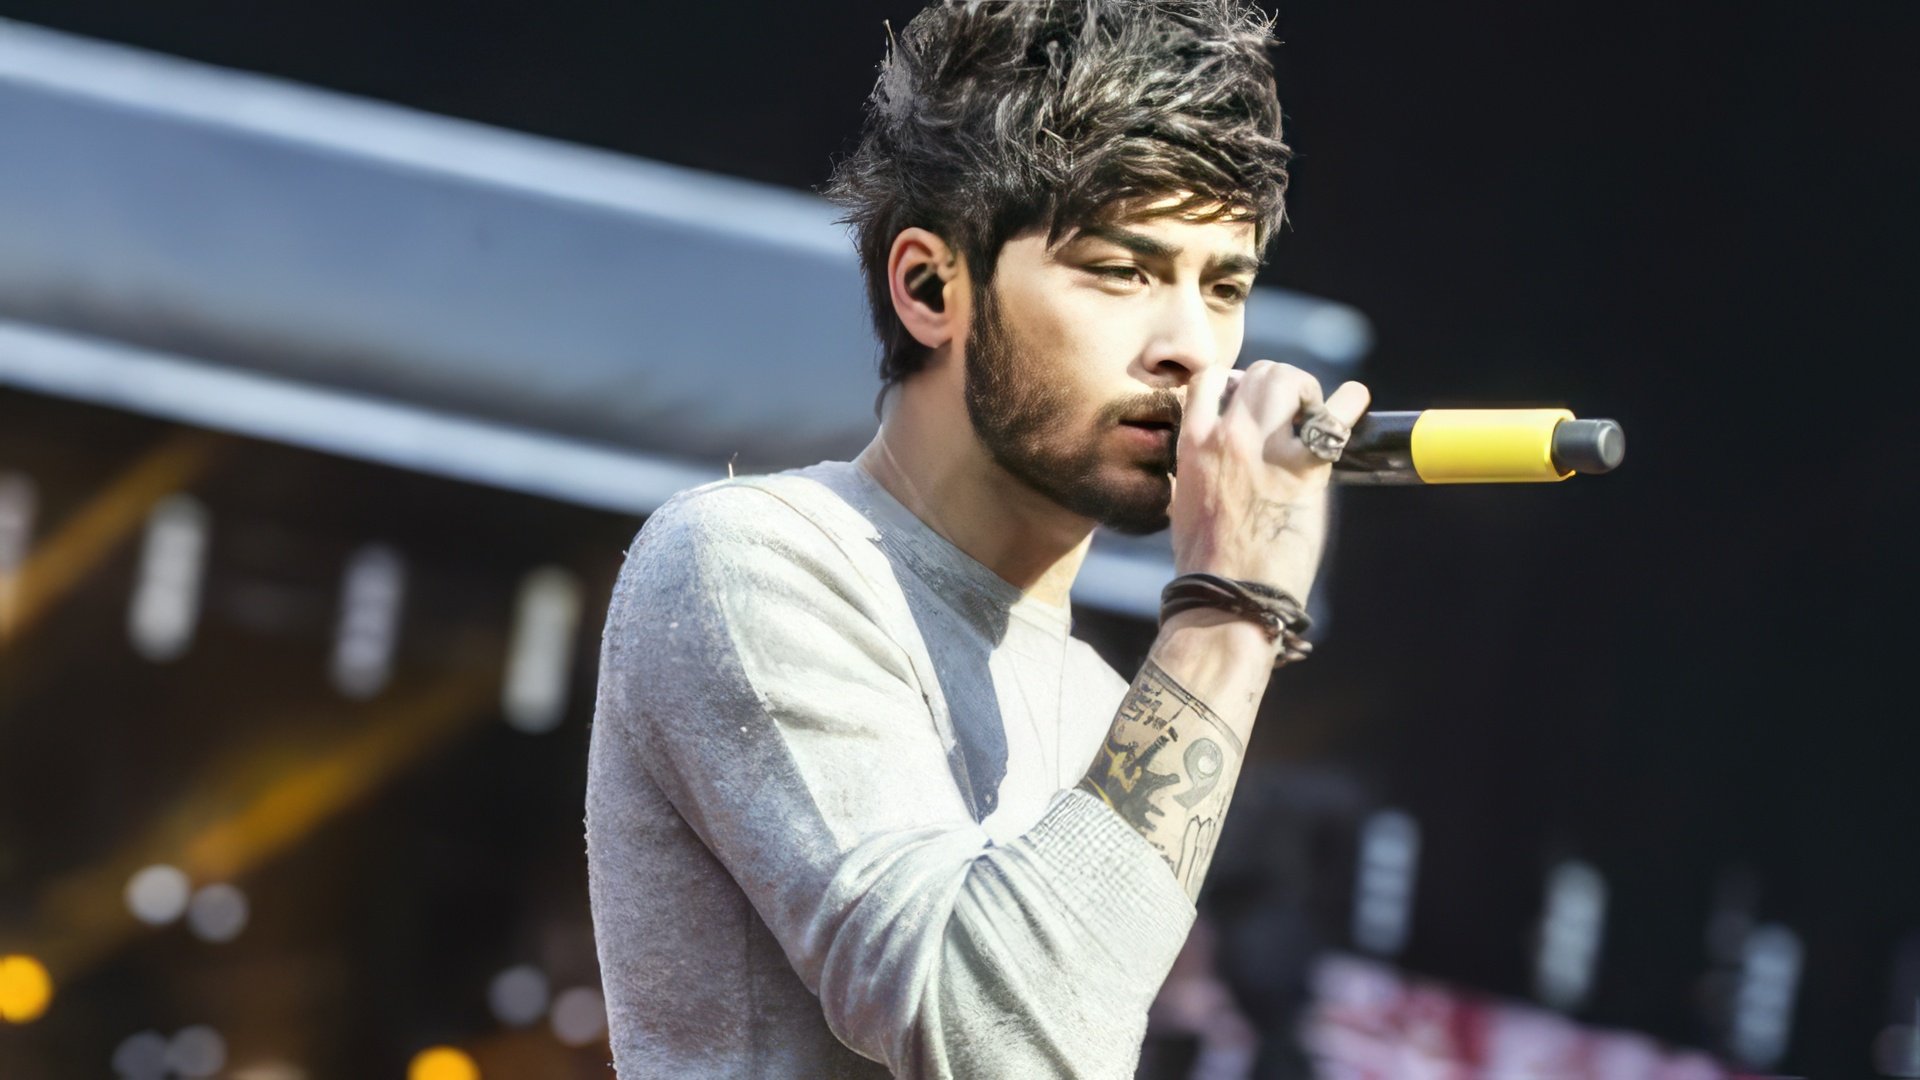 Zayn Malik left One Direction because of creative differences